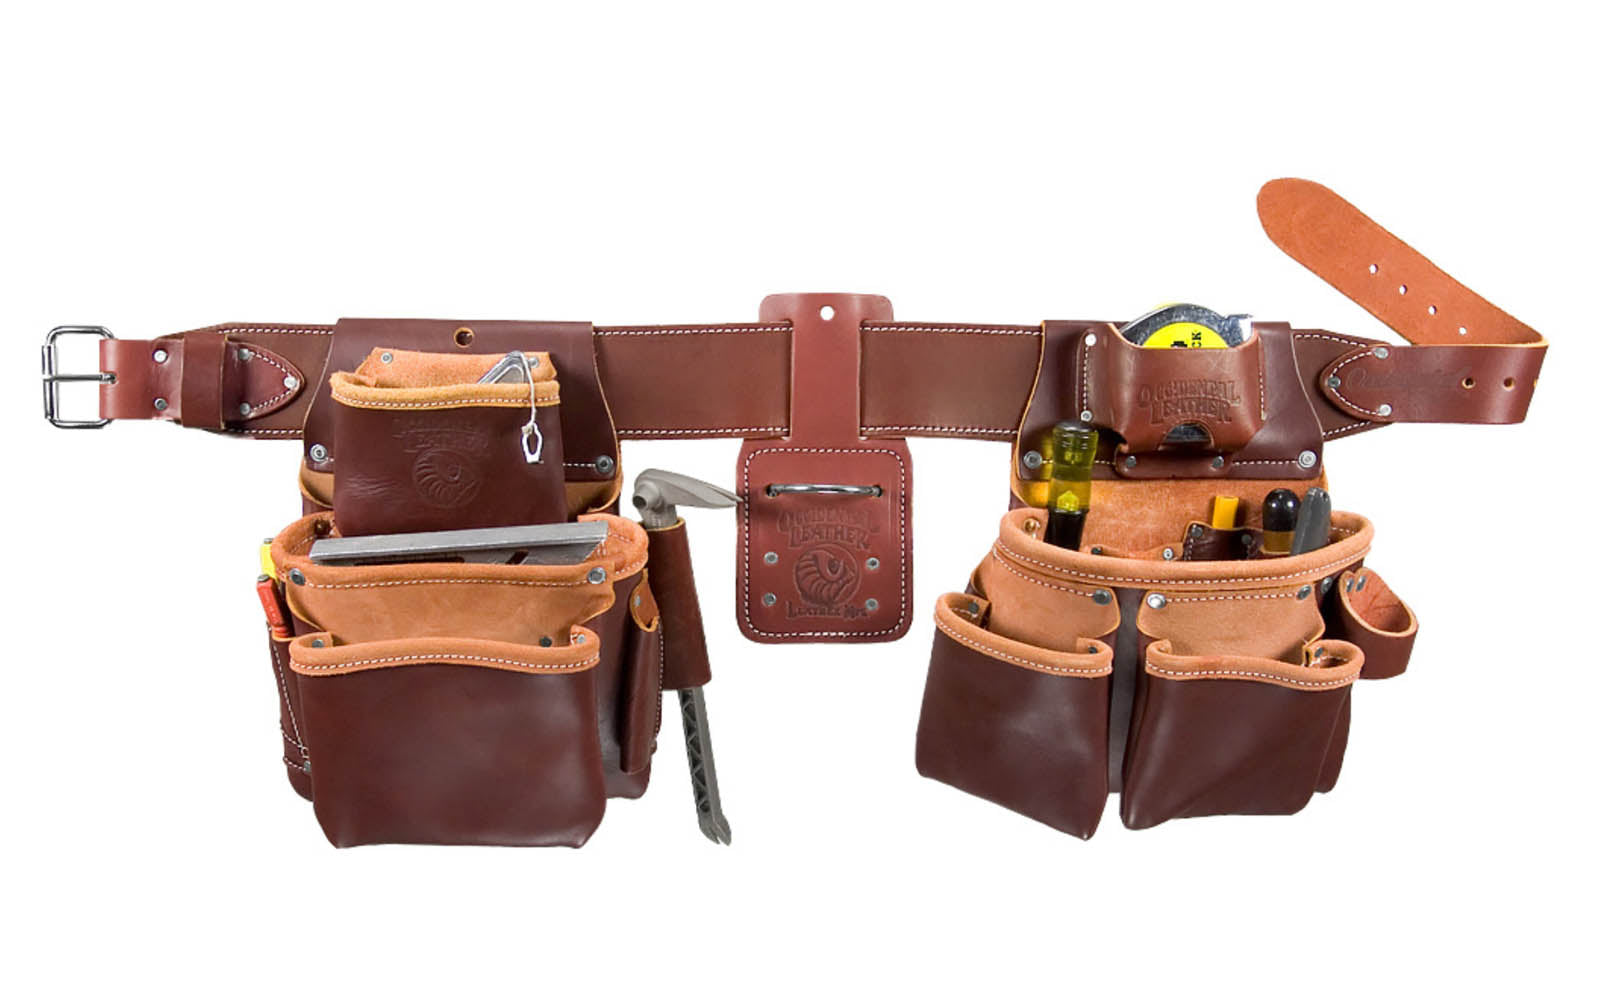 Occidental Leather "Pro Framer" Tool Belt Set Package with Double Outer Bags ~ 5080DB M - Medium Belt Size (3" Medium Ranger Work Belt) - Top-Grain Leather - Copper Rivets Reinforce Main Bags - 22 pockets - 759244019100. "Pro Leather" series is made of premium top grain cow hides tanned with oils & waxes for heavy use